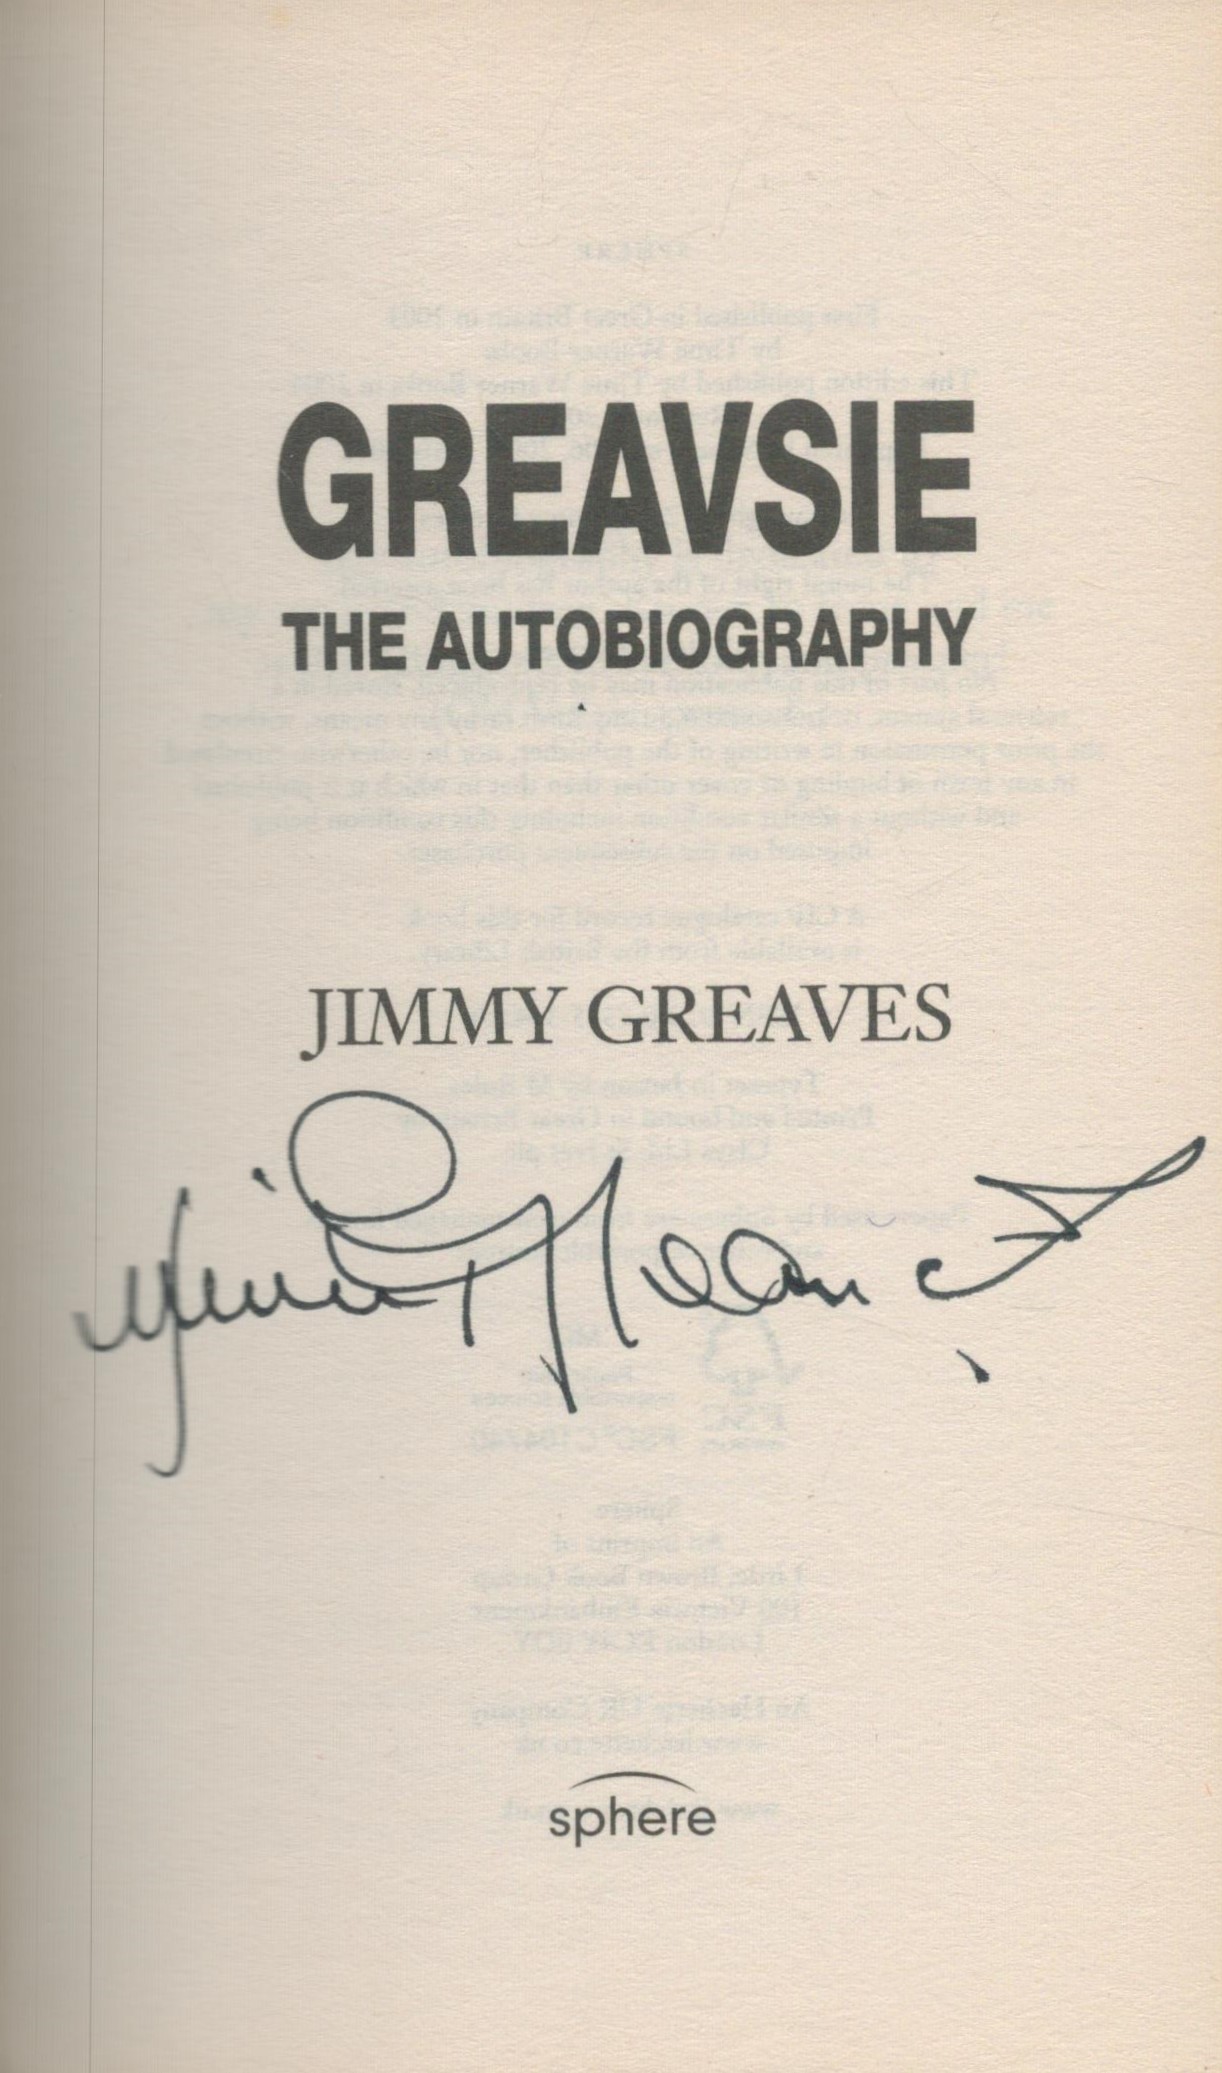 Greavsie The Autobiography signed by Jimmy Greaves paperback book. Good Condition. All autographs - Image 2 of 3